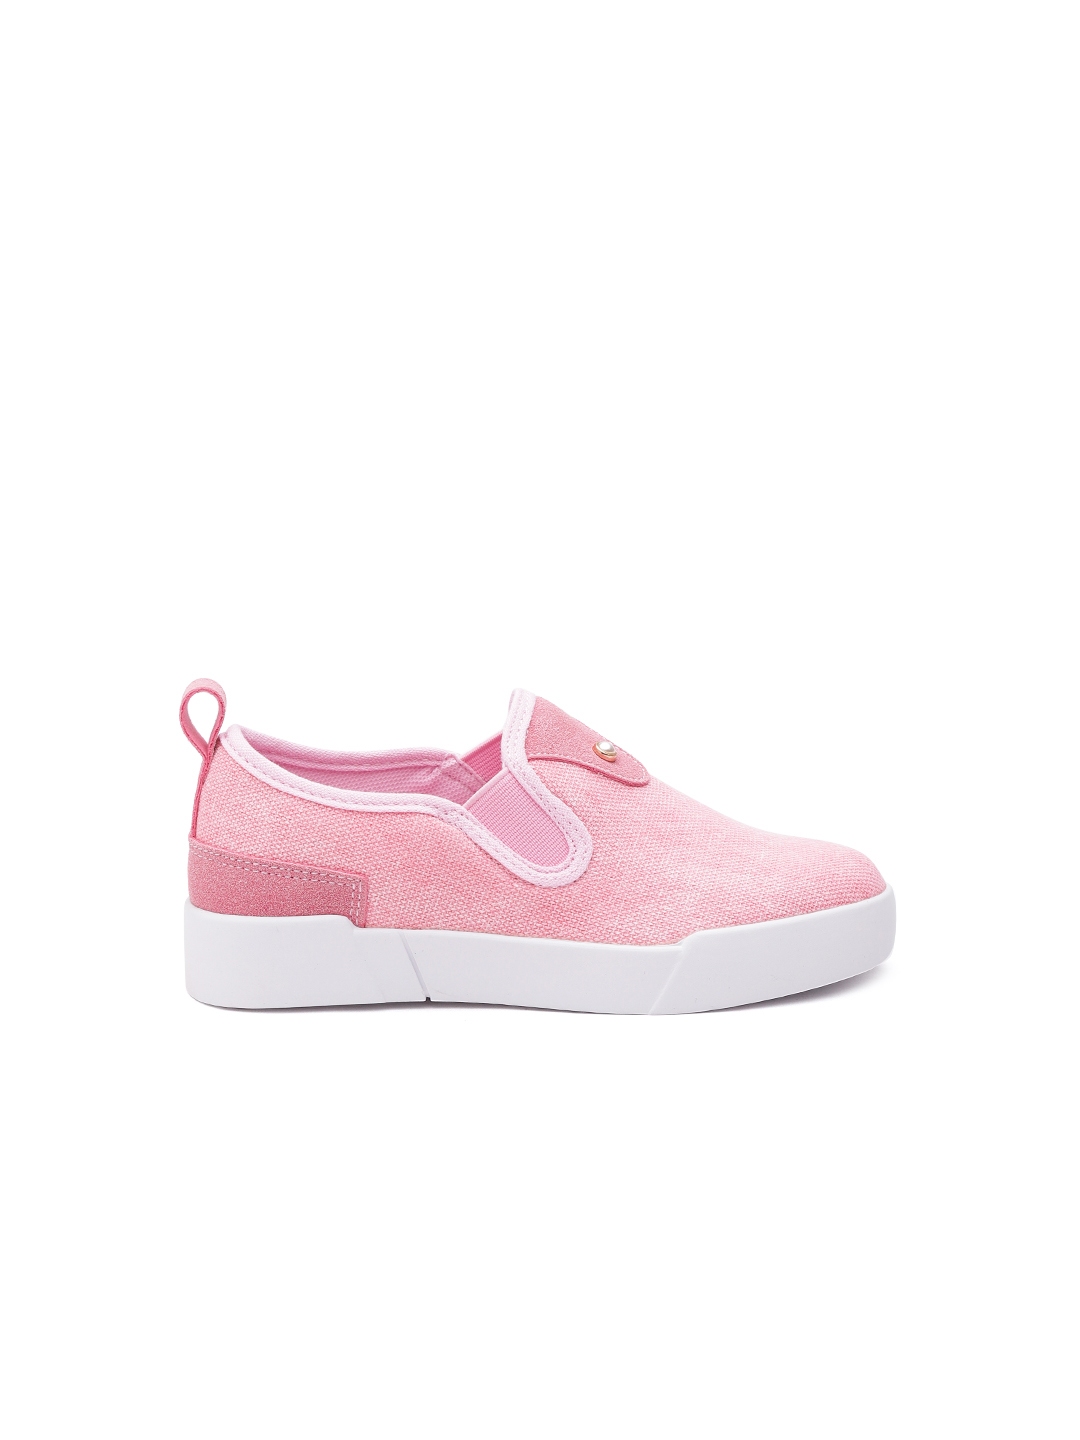 Buy Carlton London Girls Pink Slip On Sneakers - Casual Shoes for Girls ...